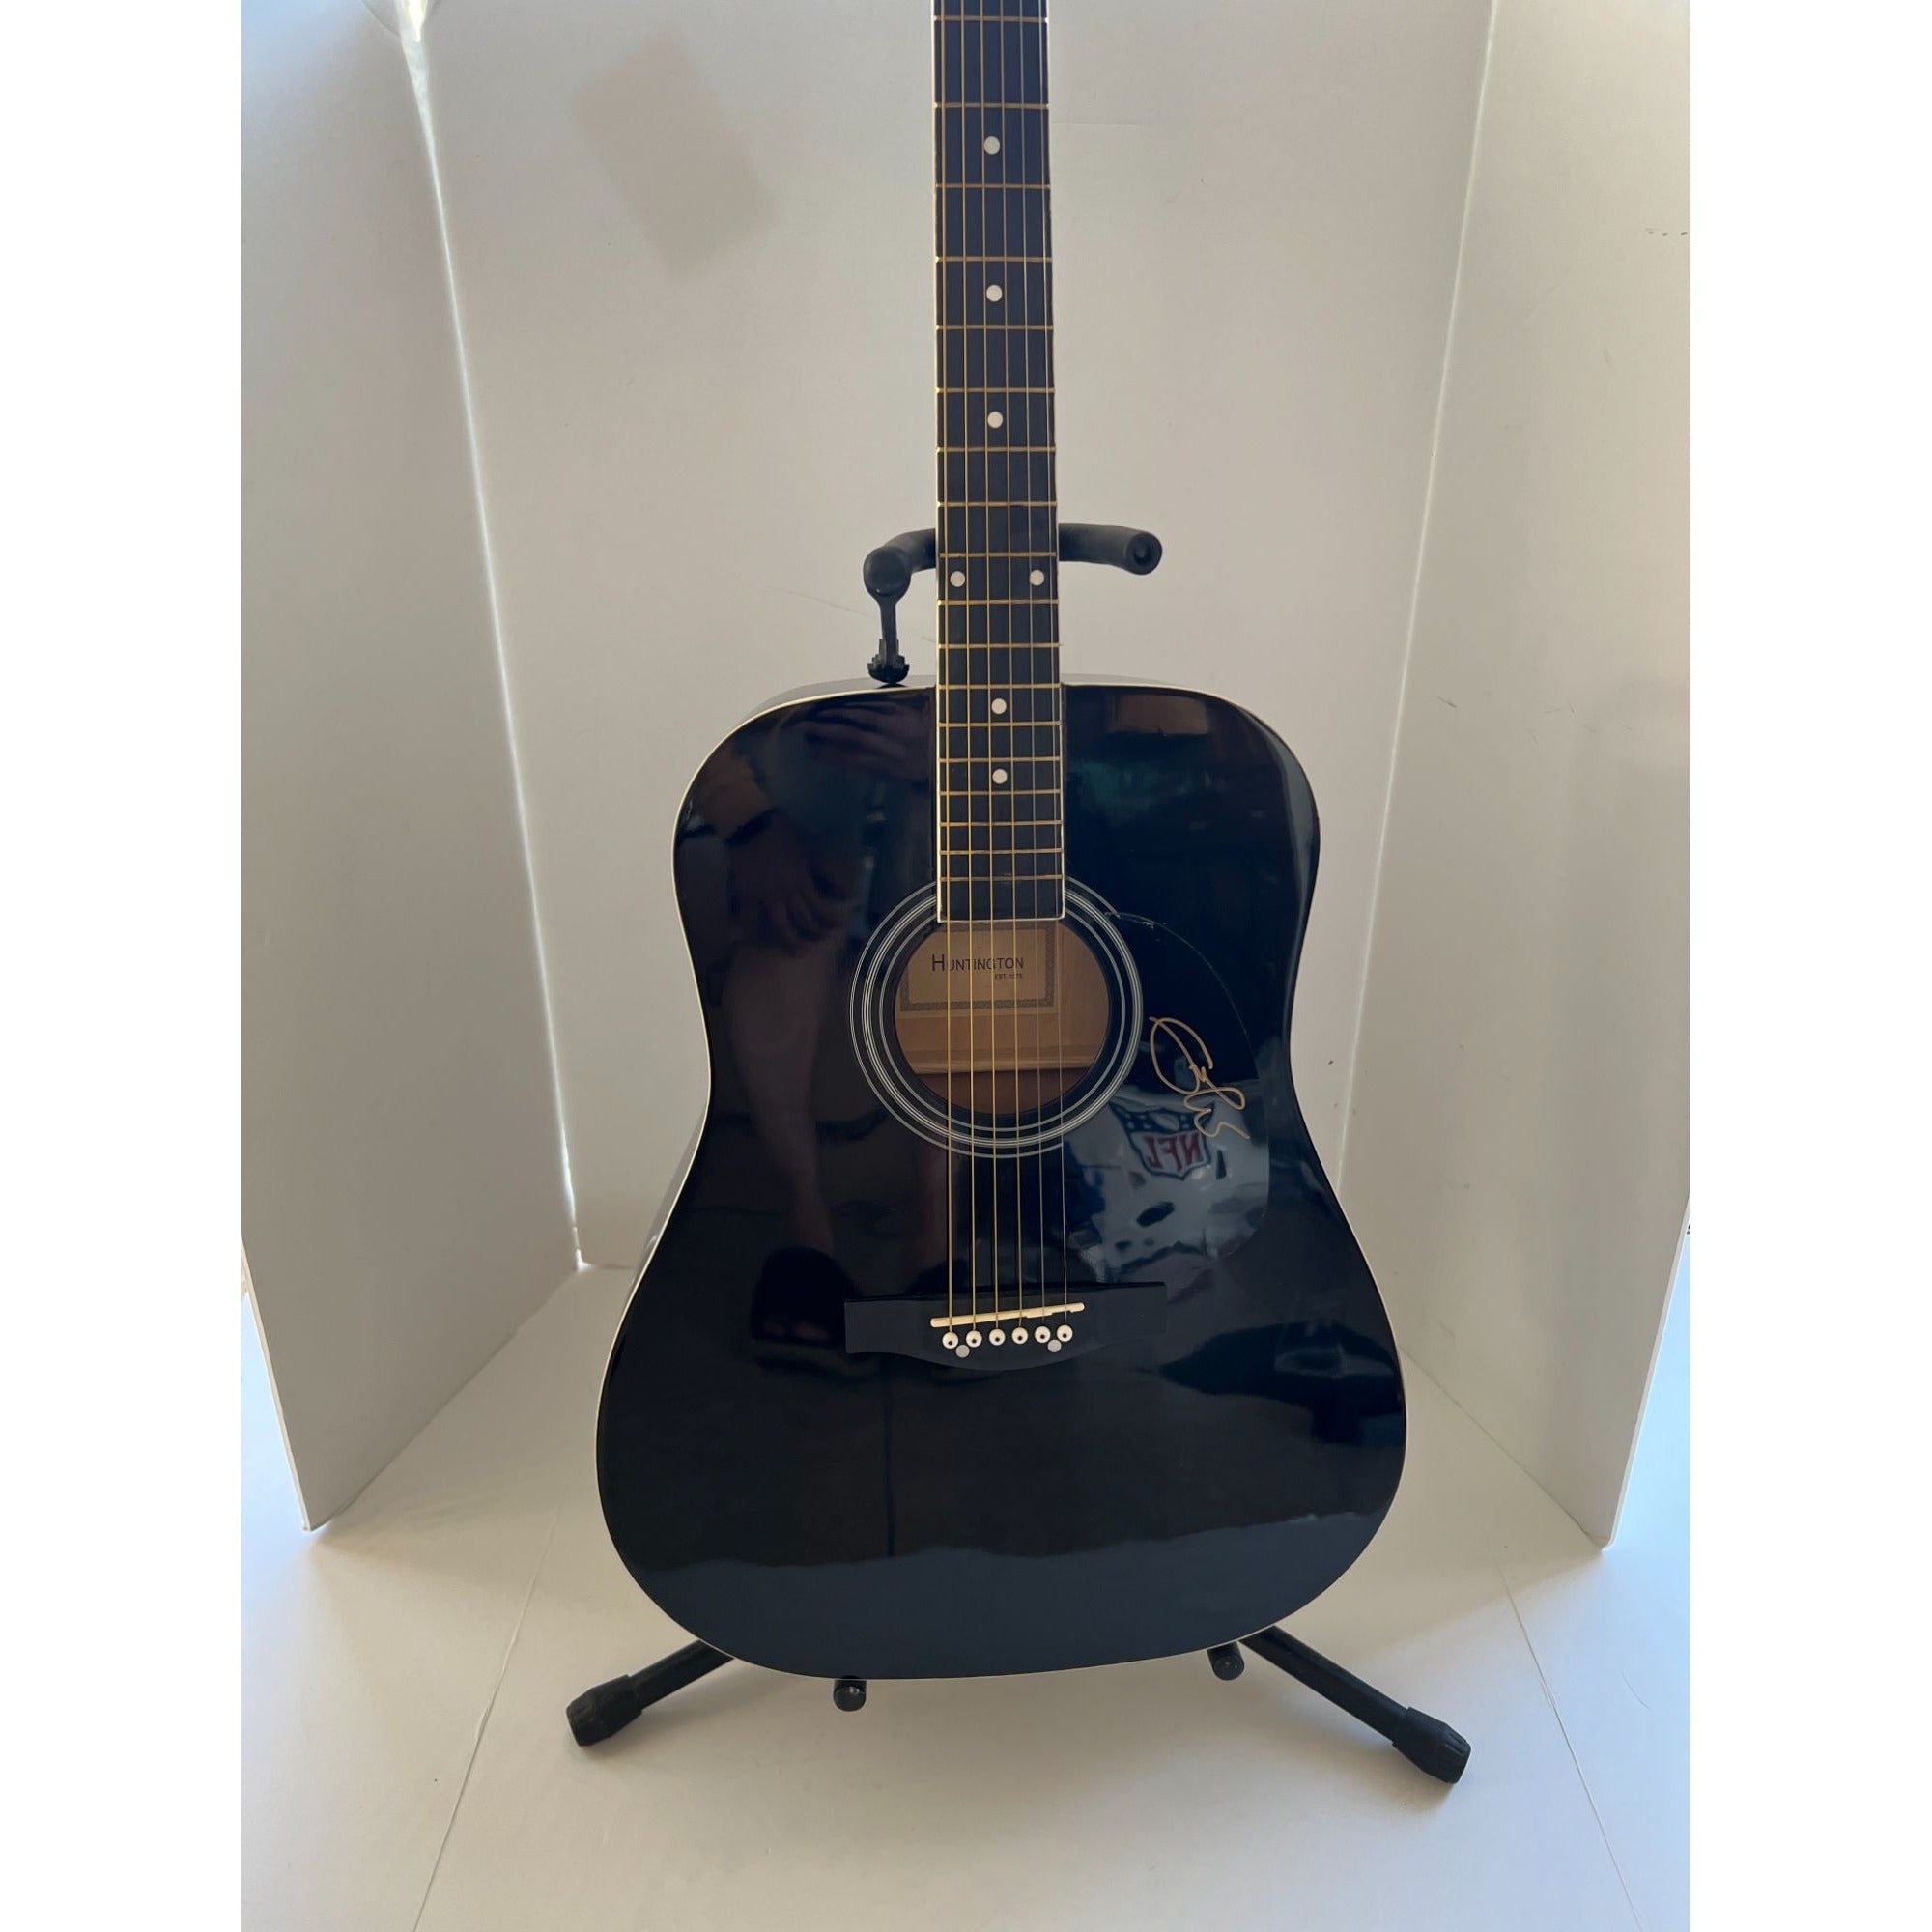 Eric Clapton full size acoustic guitar 39' one of a kind signed with proof